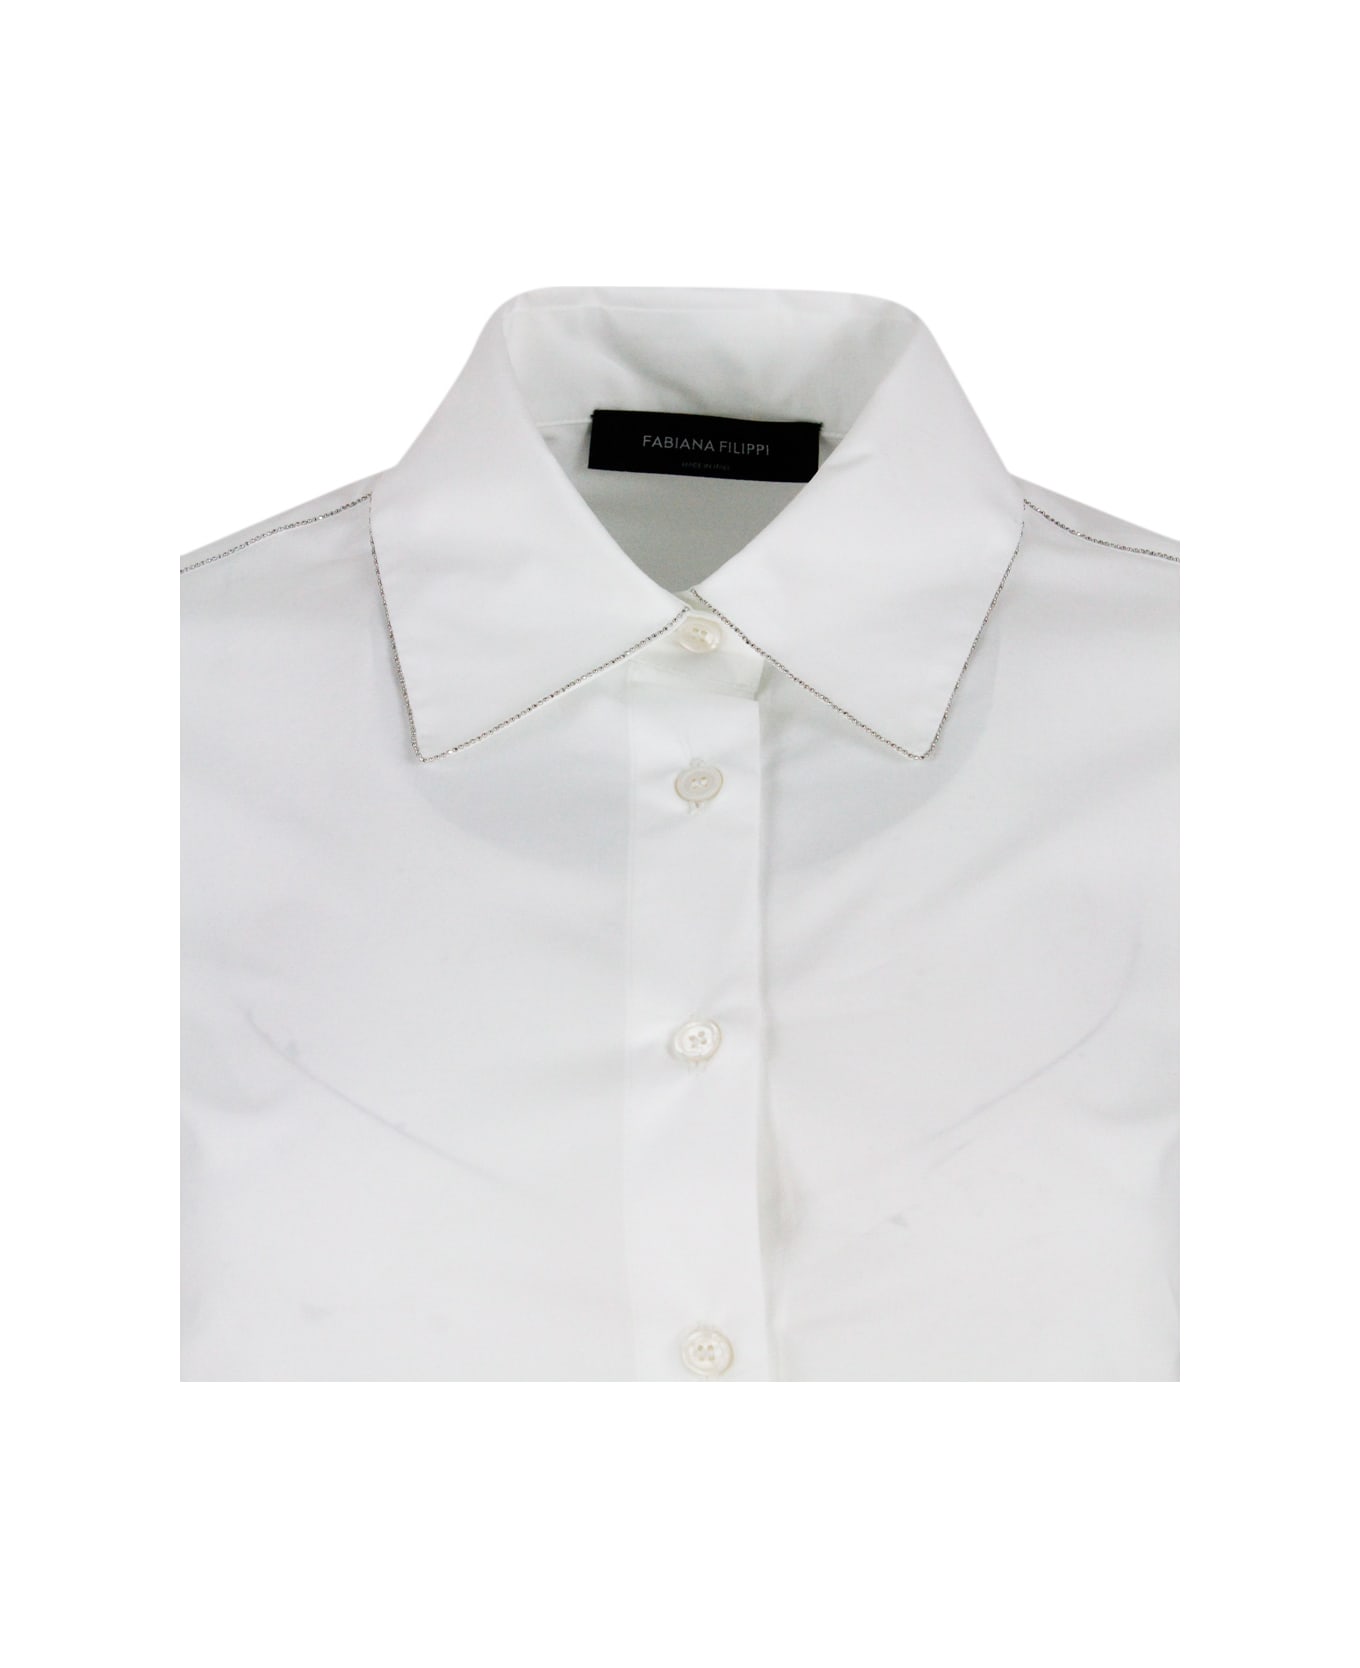 Fabiana Filippi Long-sleeved Shirt In Stretch Cotton Poplin With A Slim Fit Trimmed With Rows Of Brilliant Jewels - White